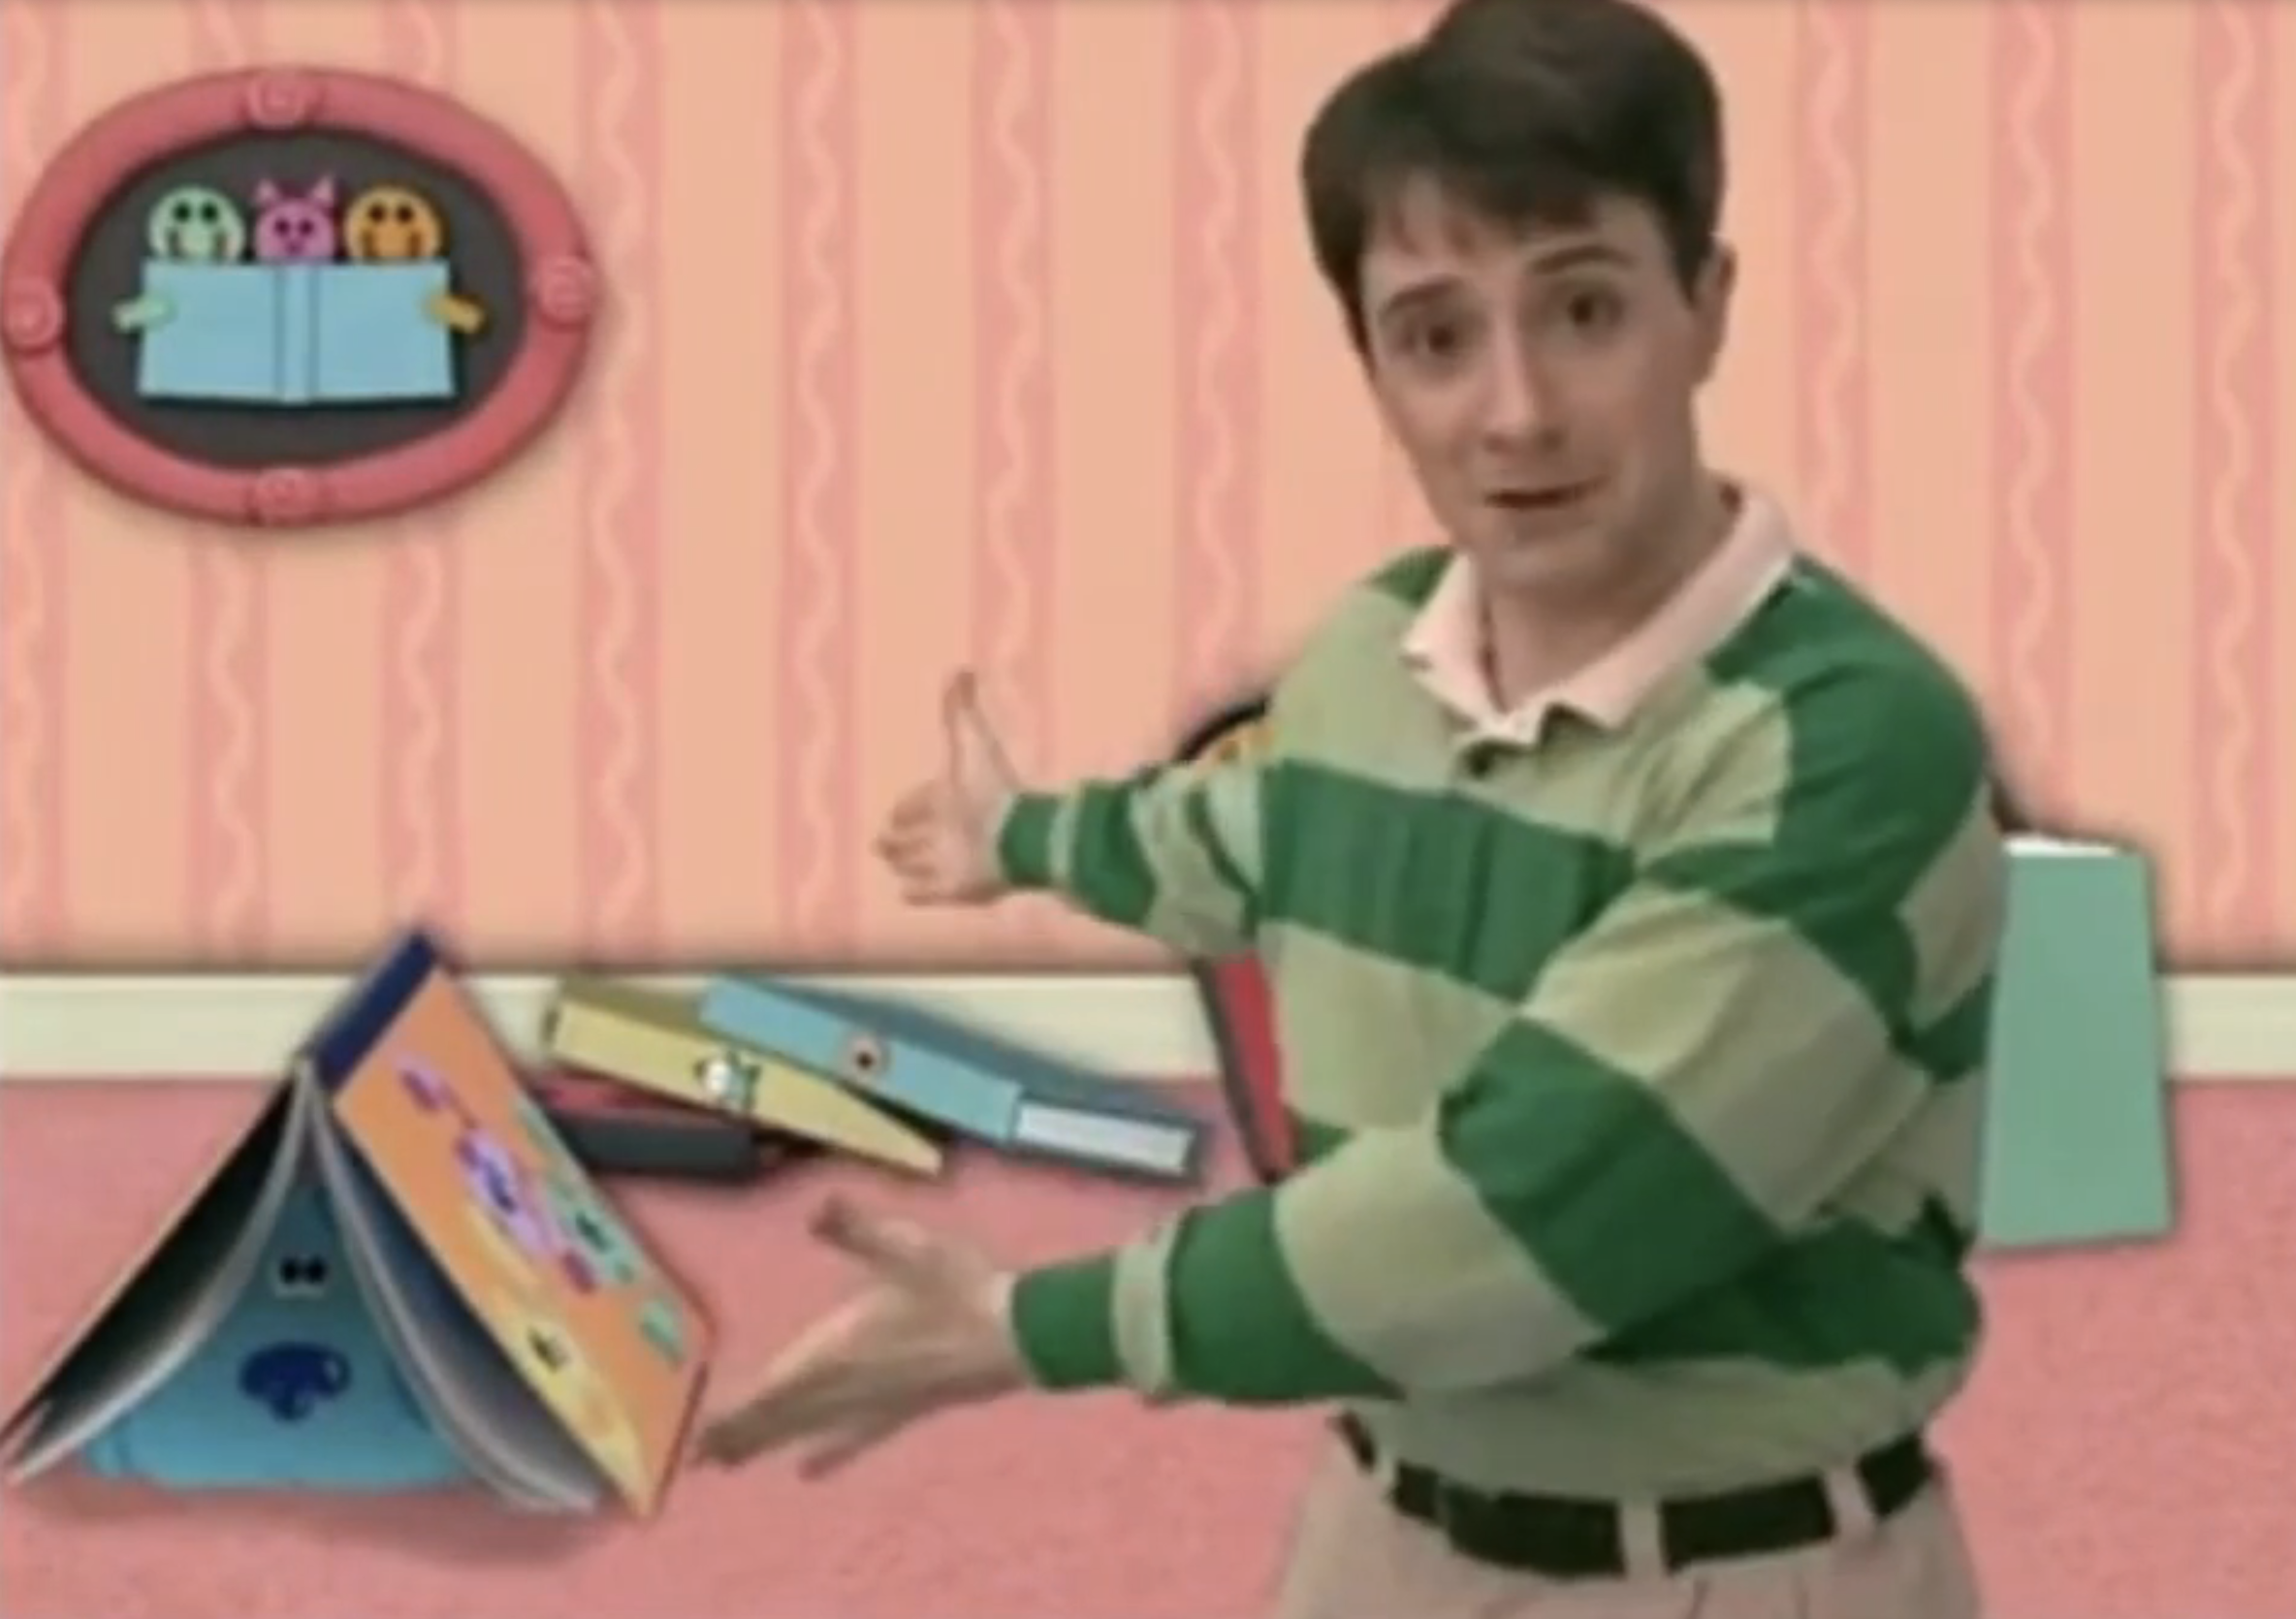 Steve from Blue&#x27;s Clues in a striped shirt gesturing to a fallen stack of animated books